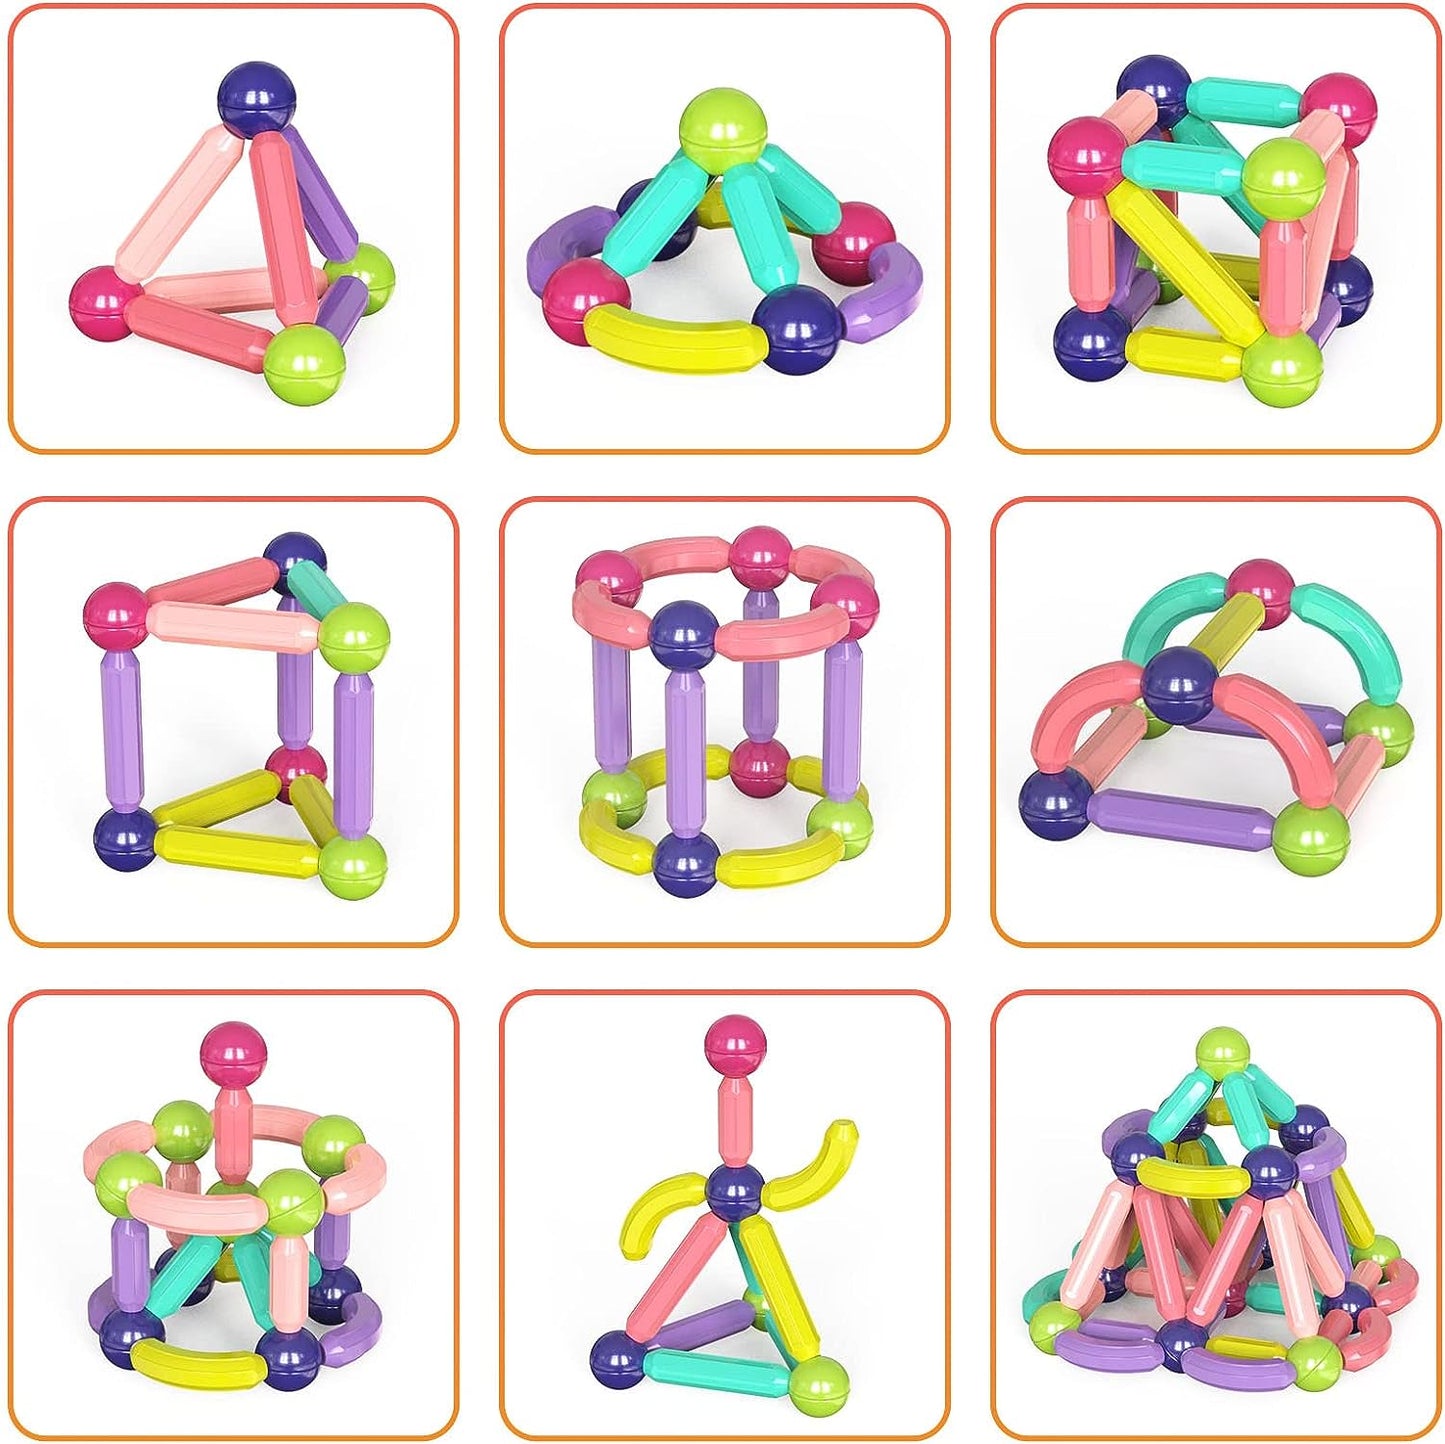 Magnetic Building Blocks Set For Kids Ages 3, STEM Construction 3D Stacking Magnetic Toys For Boys And Girls,Magnetic Sticks And Balls Game Set For Kid Is Early Educational Learning 128PCS.